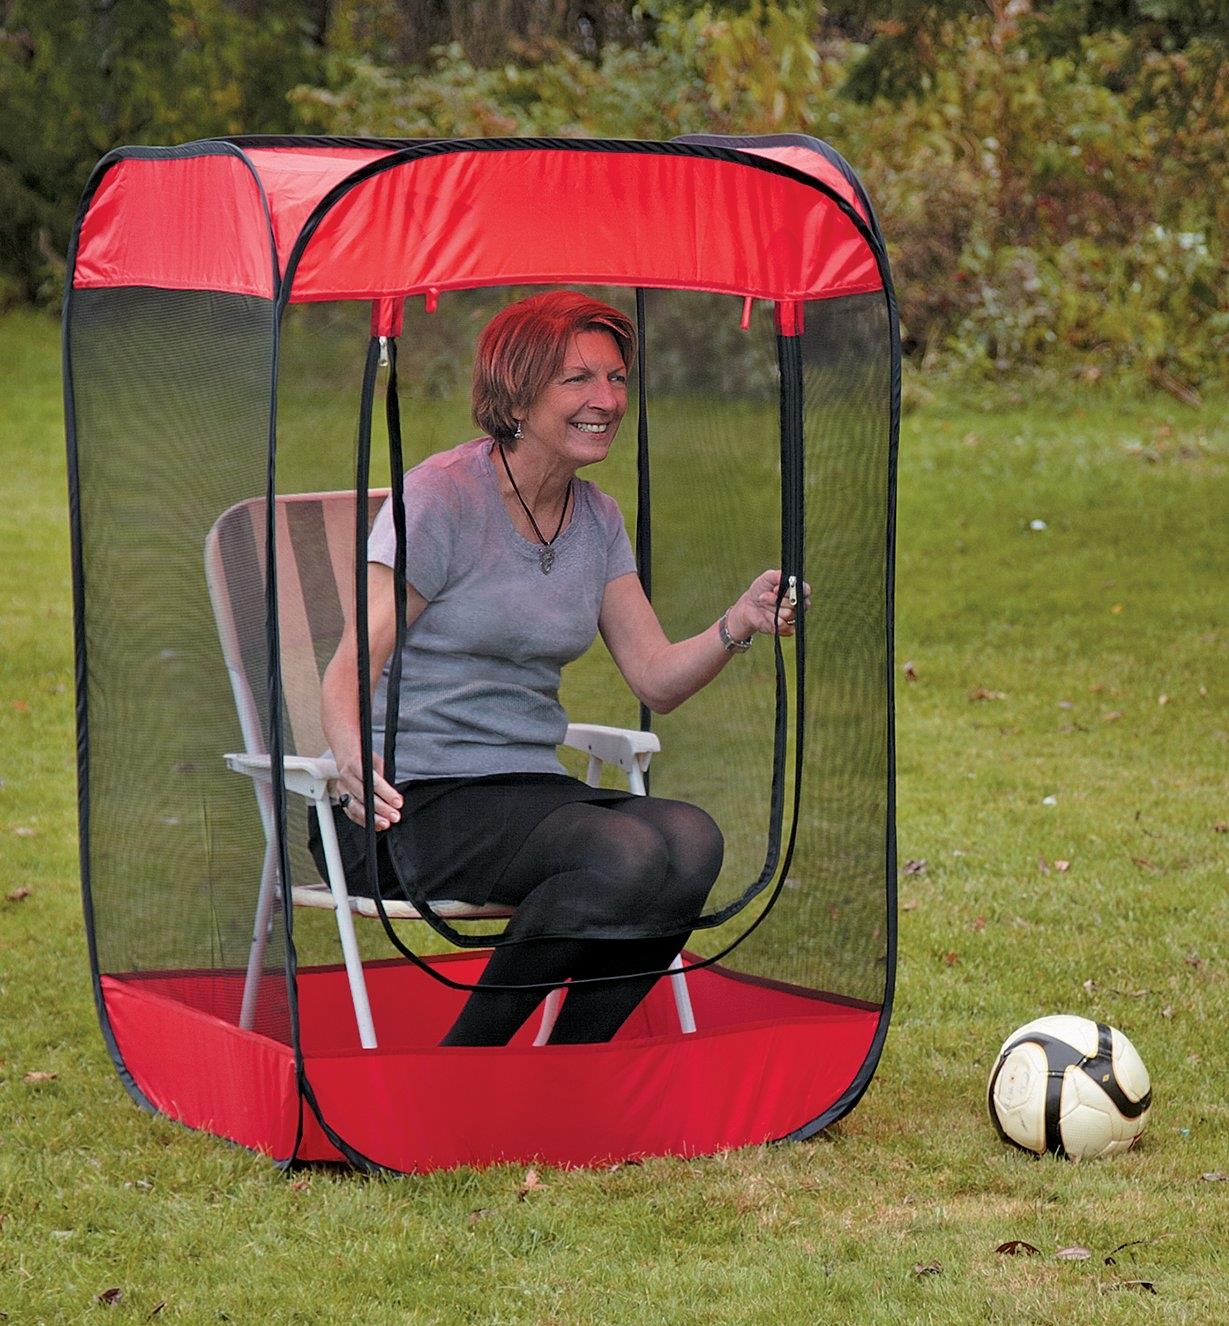 A woman sits in a lawn chair inside the Insect-a-Hide Pop-Up Shelter